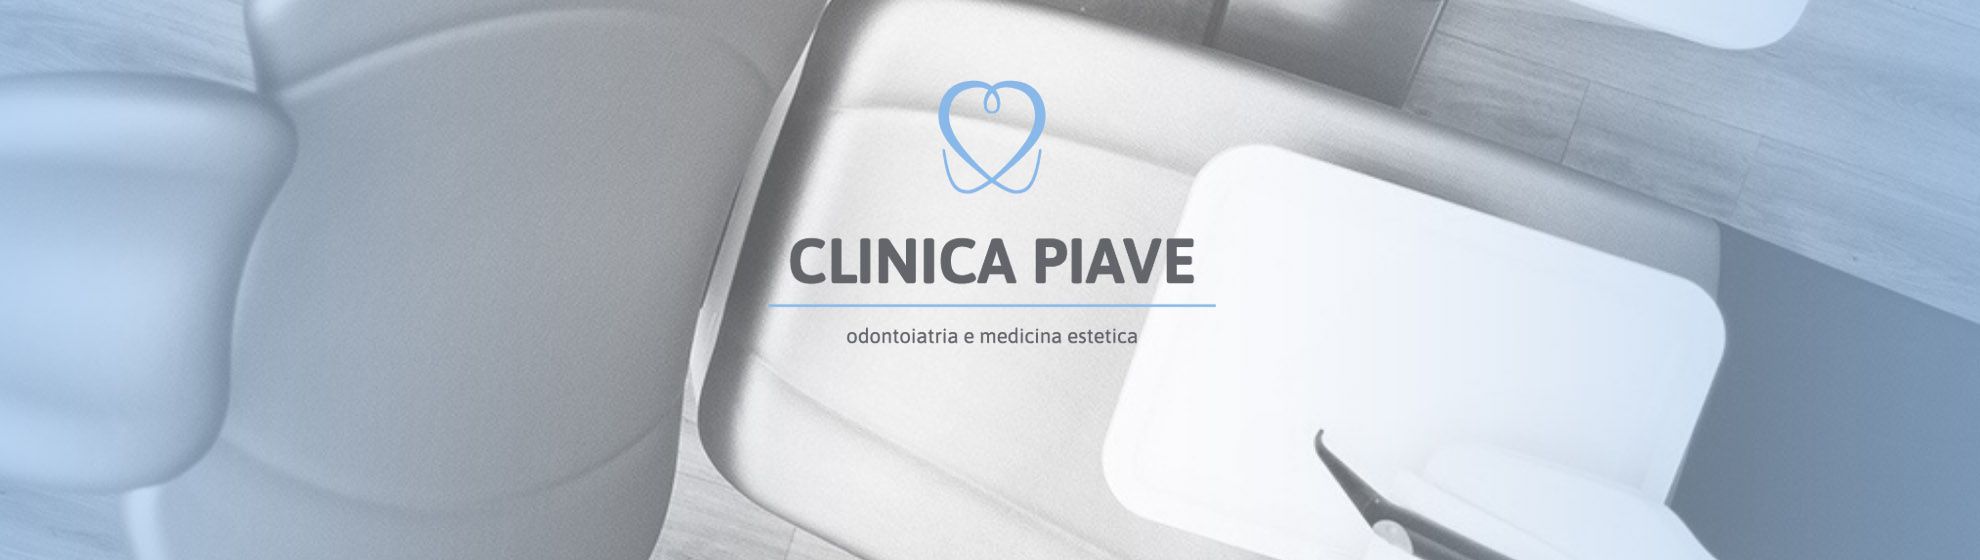 Clinica Piave